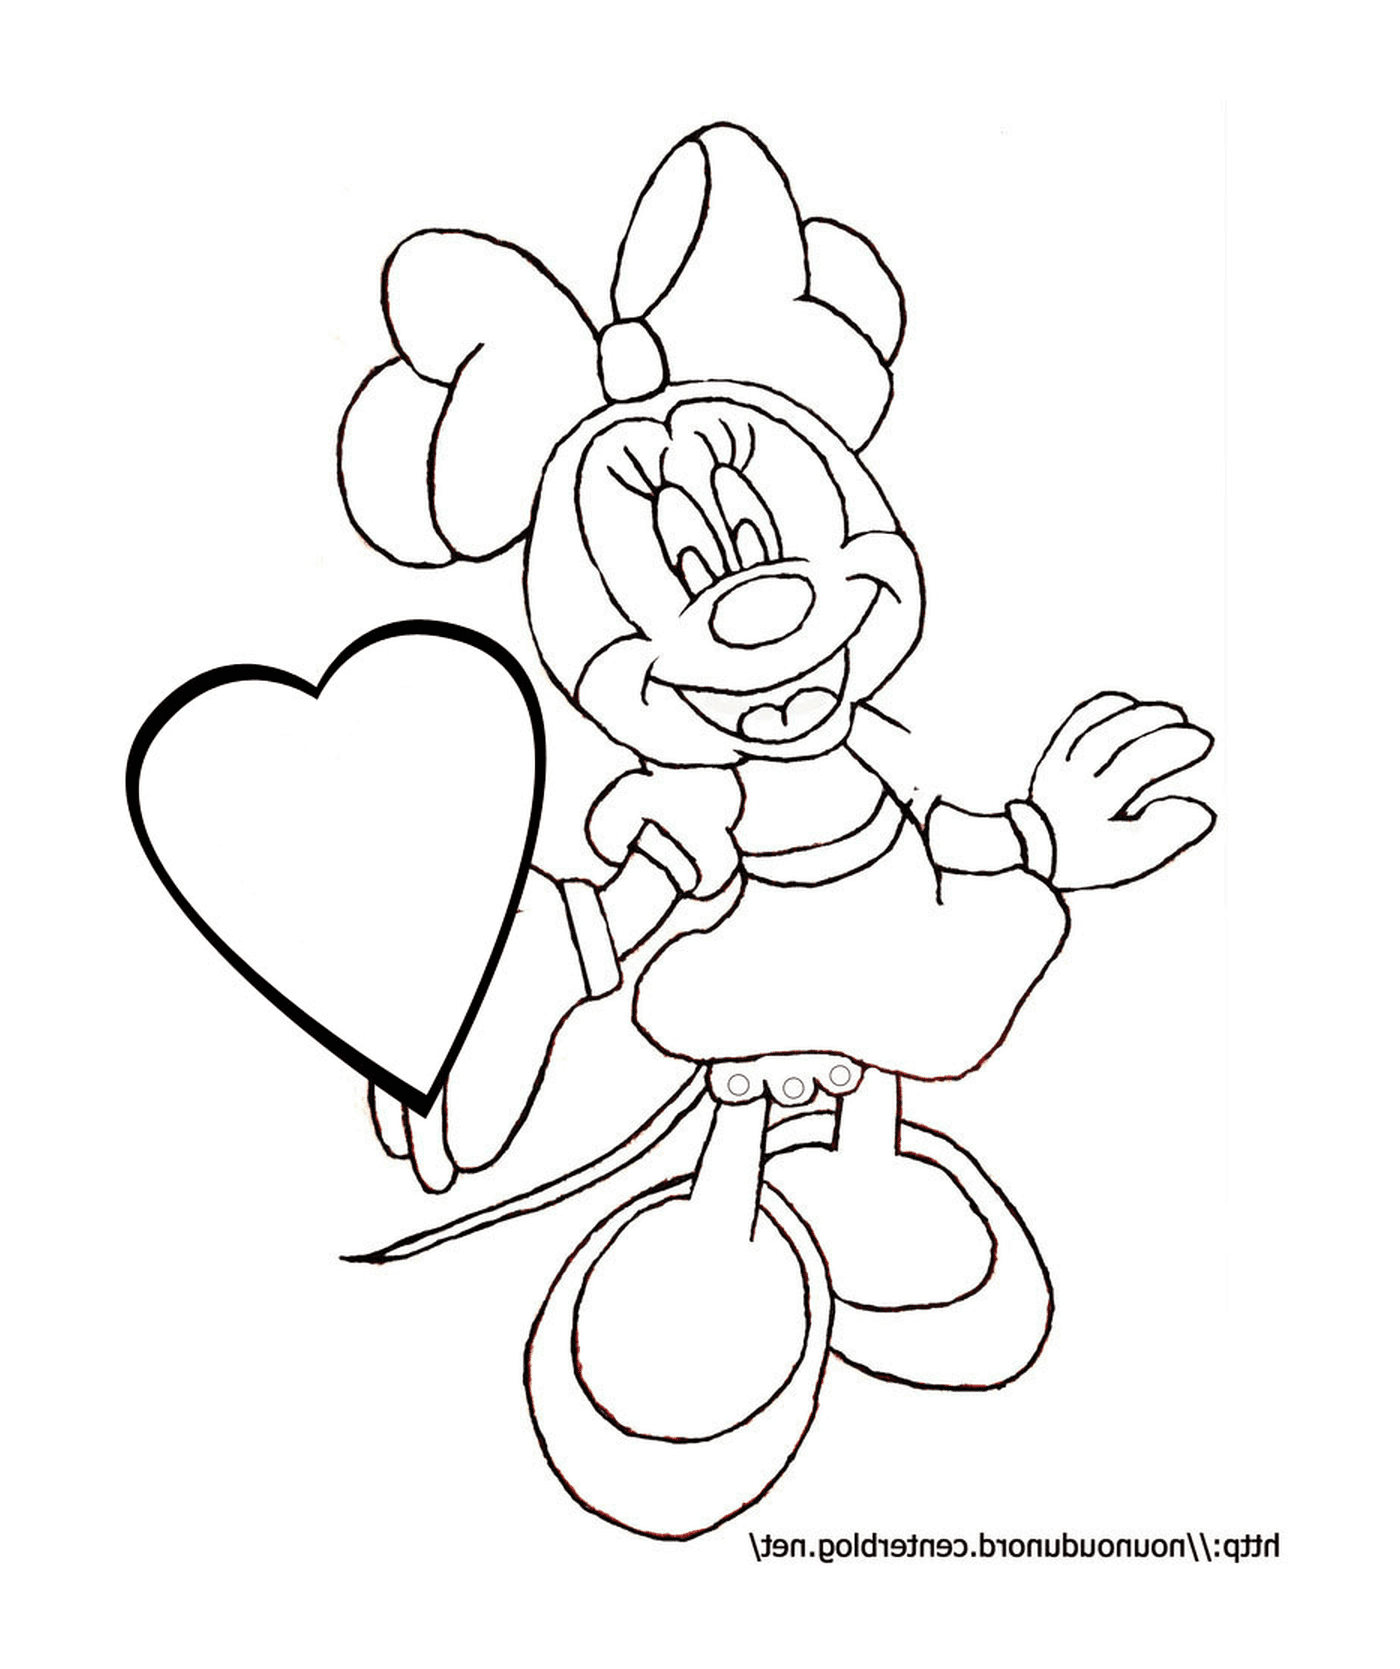  Minnie Mouse with a heart-shaped balloon 